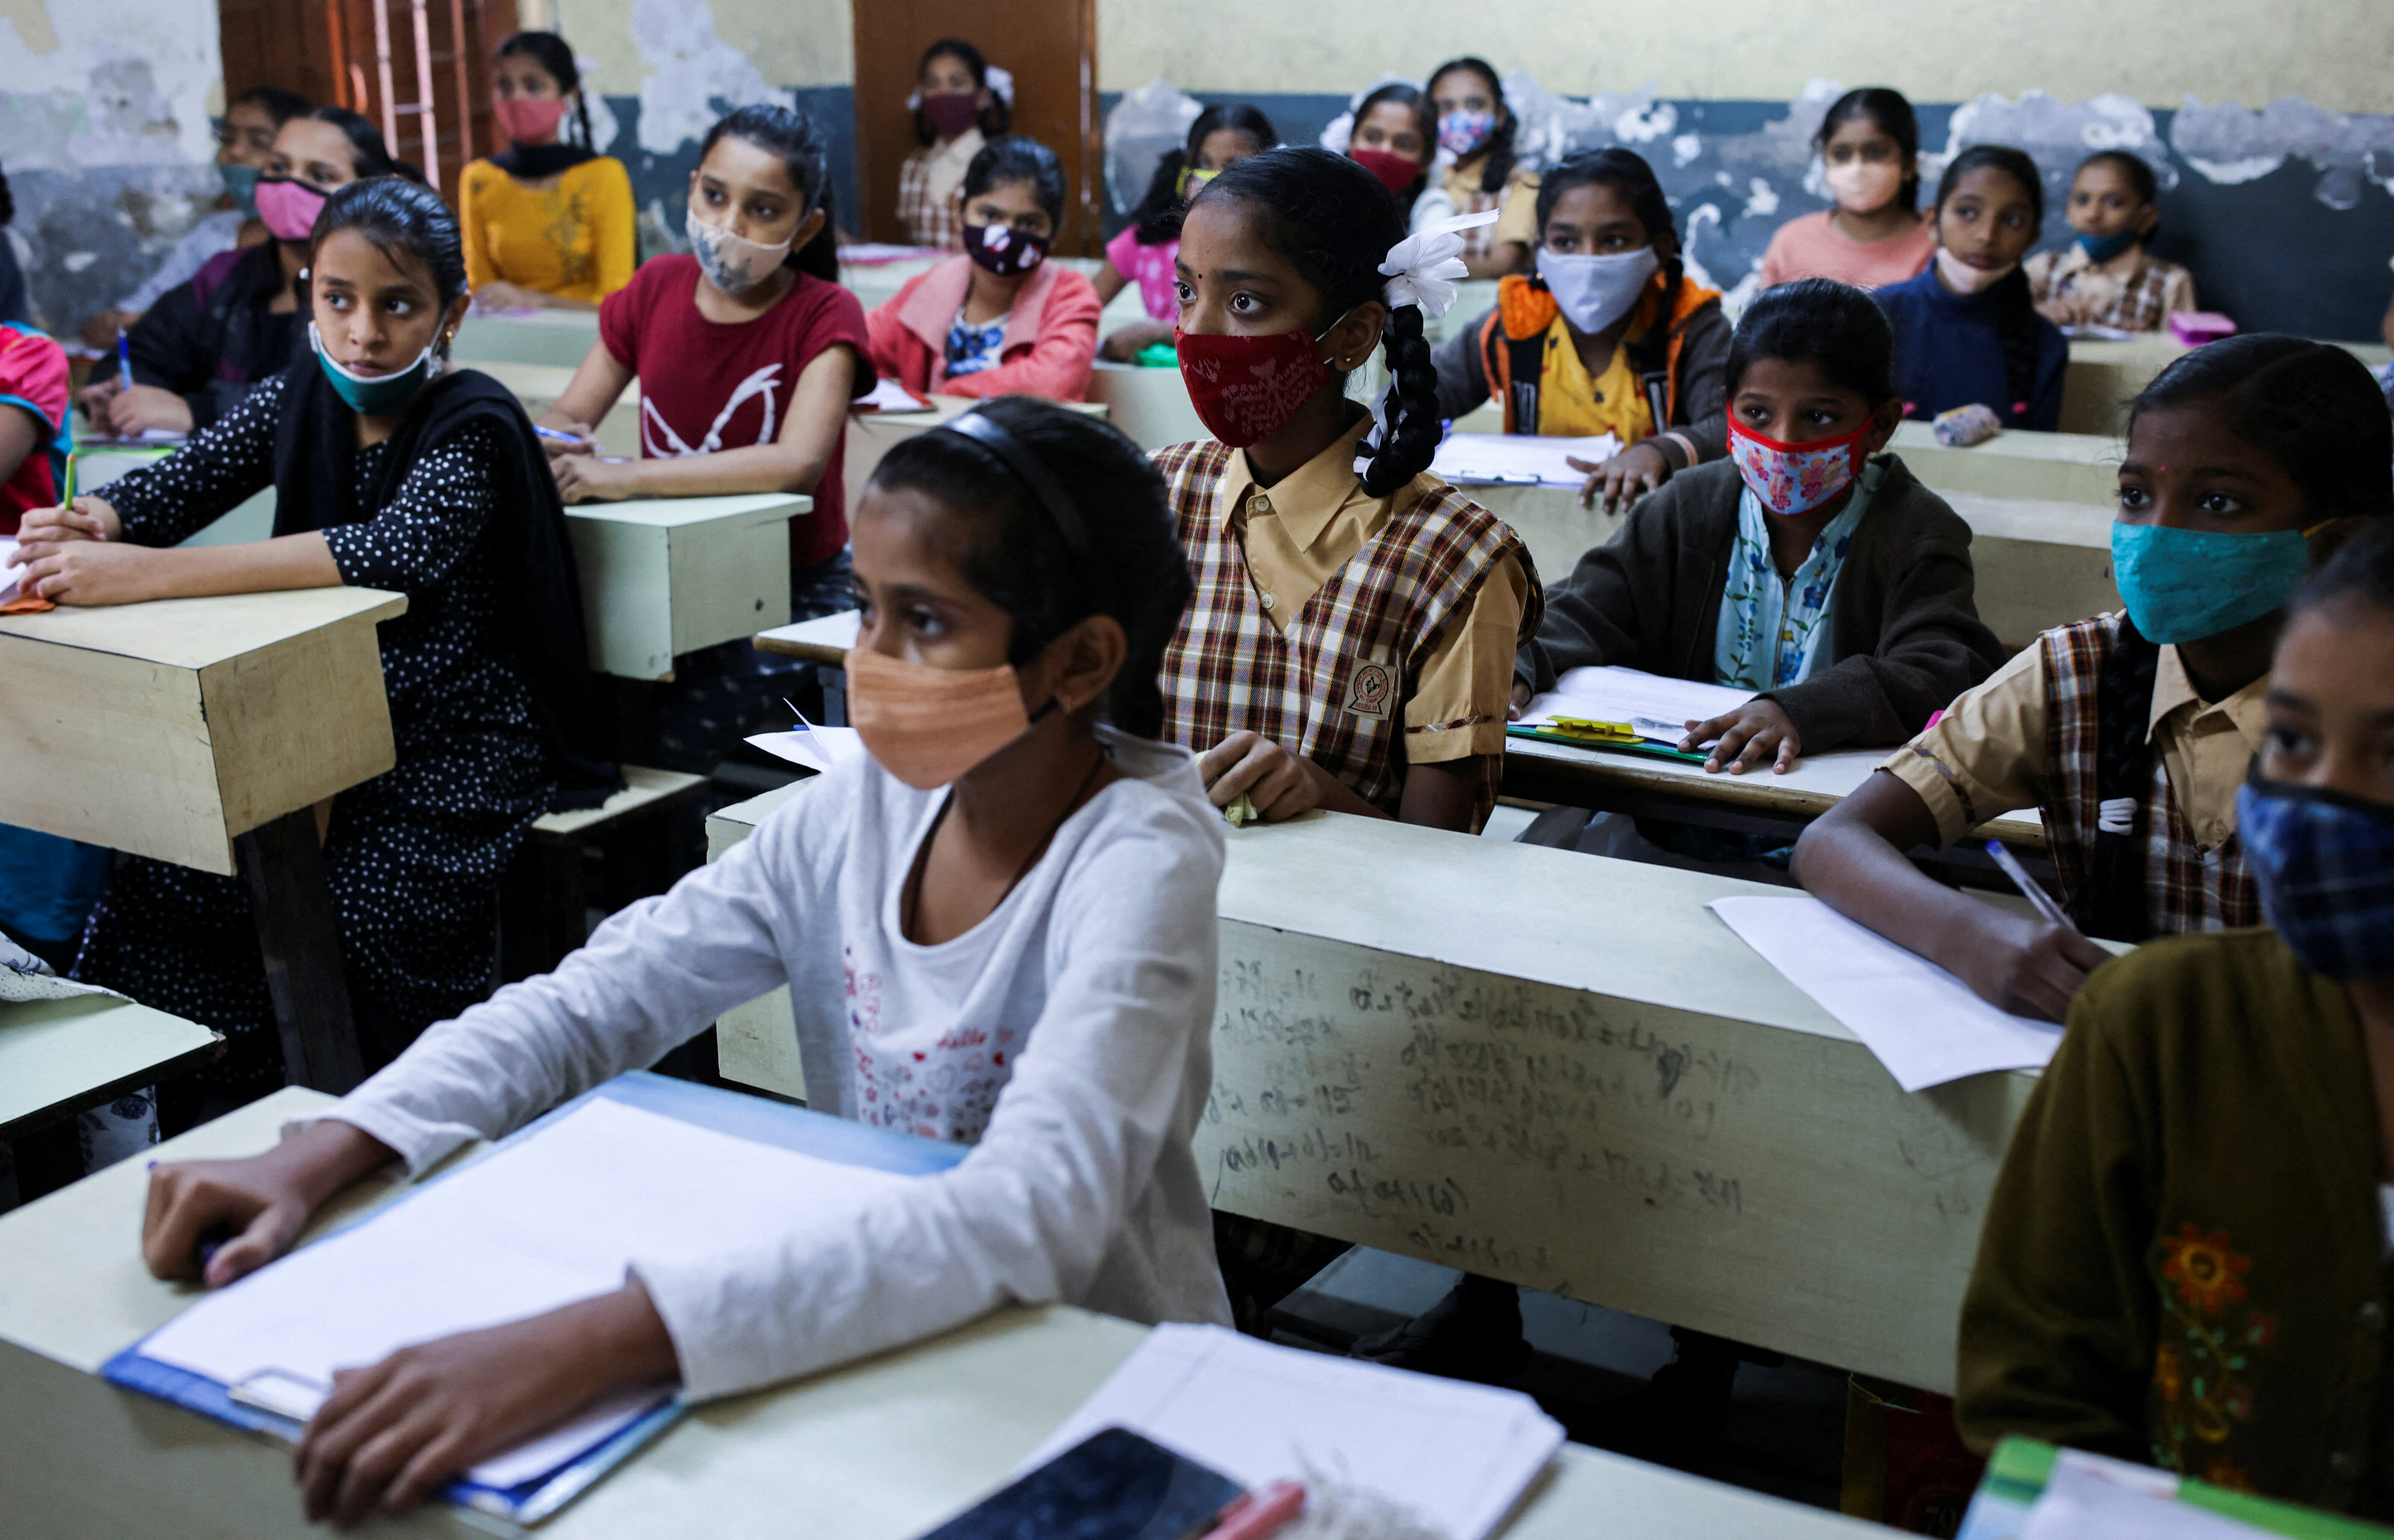 Students attend class in a school after they reopened amidst the spread of the coronavirus disease (COVID-19) pandemic in Mumbai